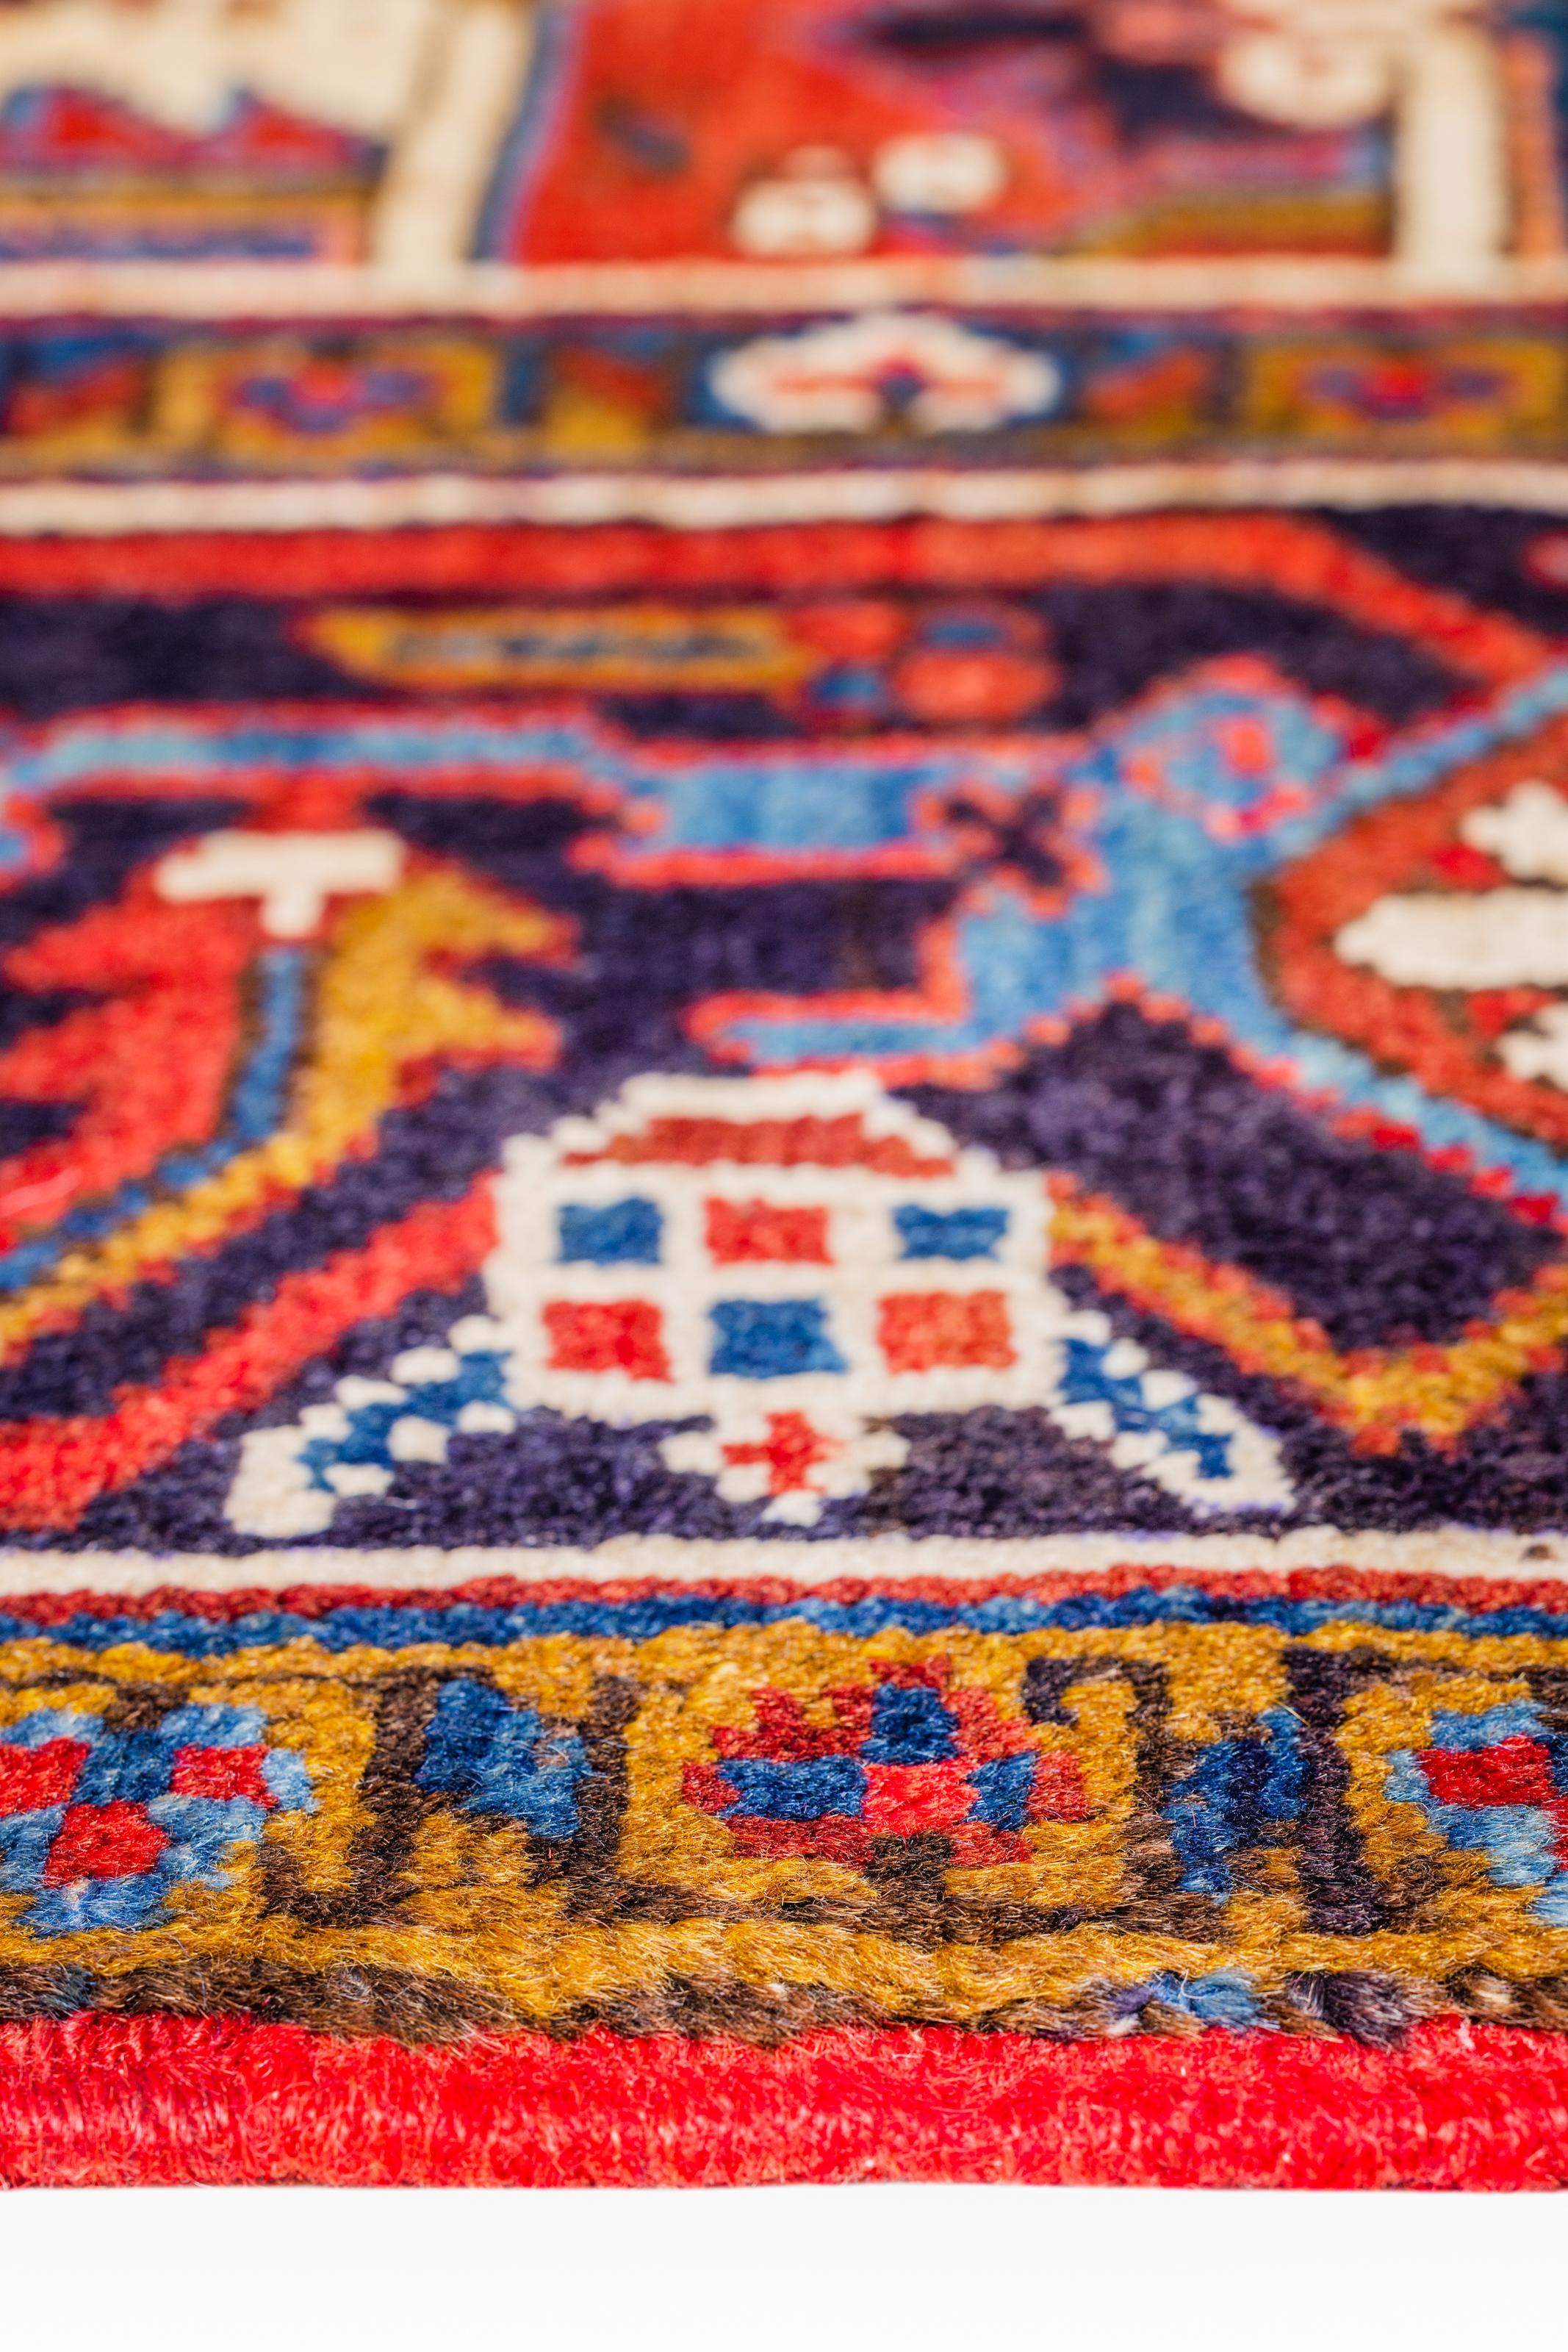 Renowned for their rich colors and interesting designs, Persian rugs are made with all natural wools and silk. Their beauty and the impact it will have on a home is endless.

Exact Dimensions: 9' 8